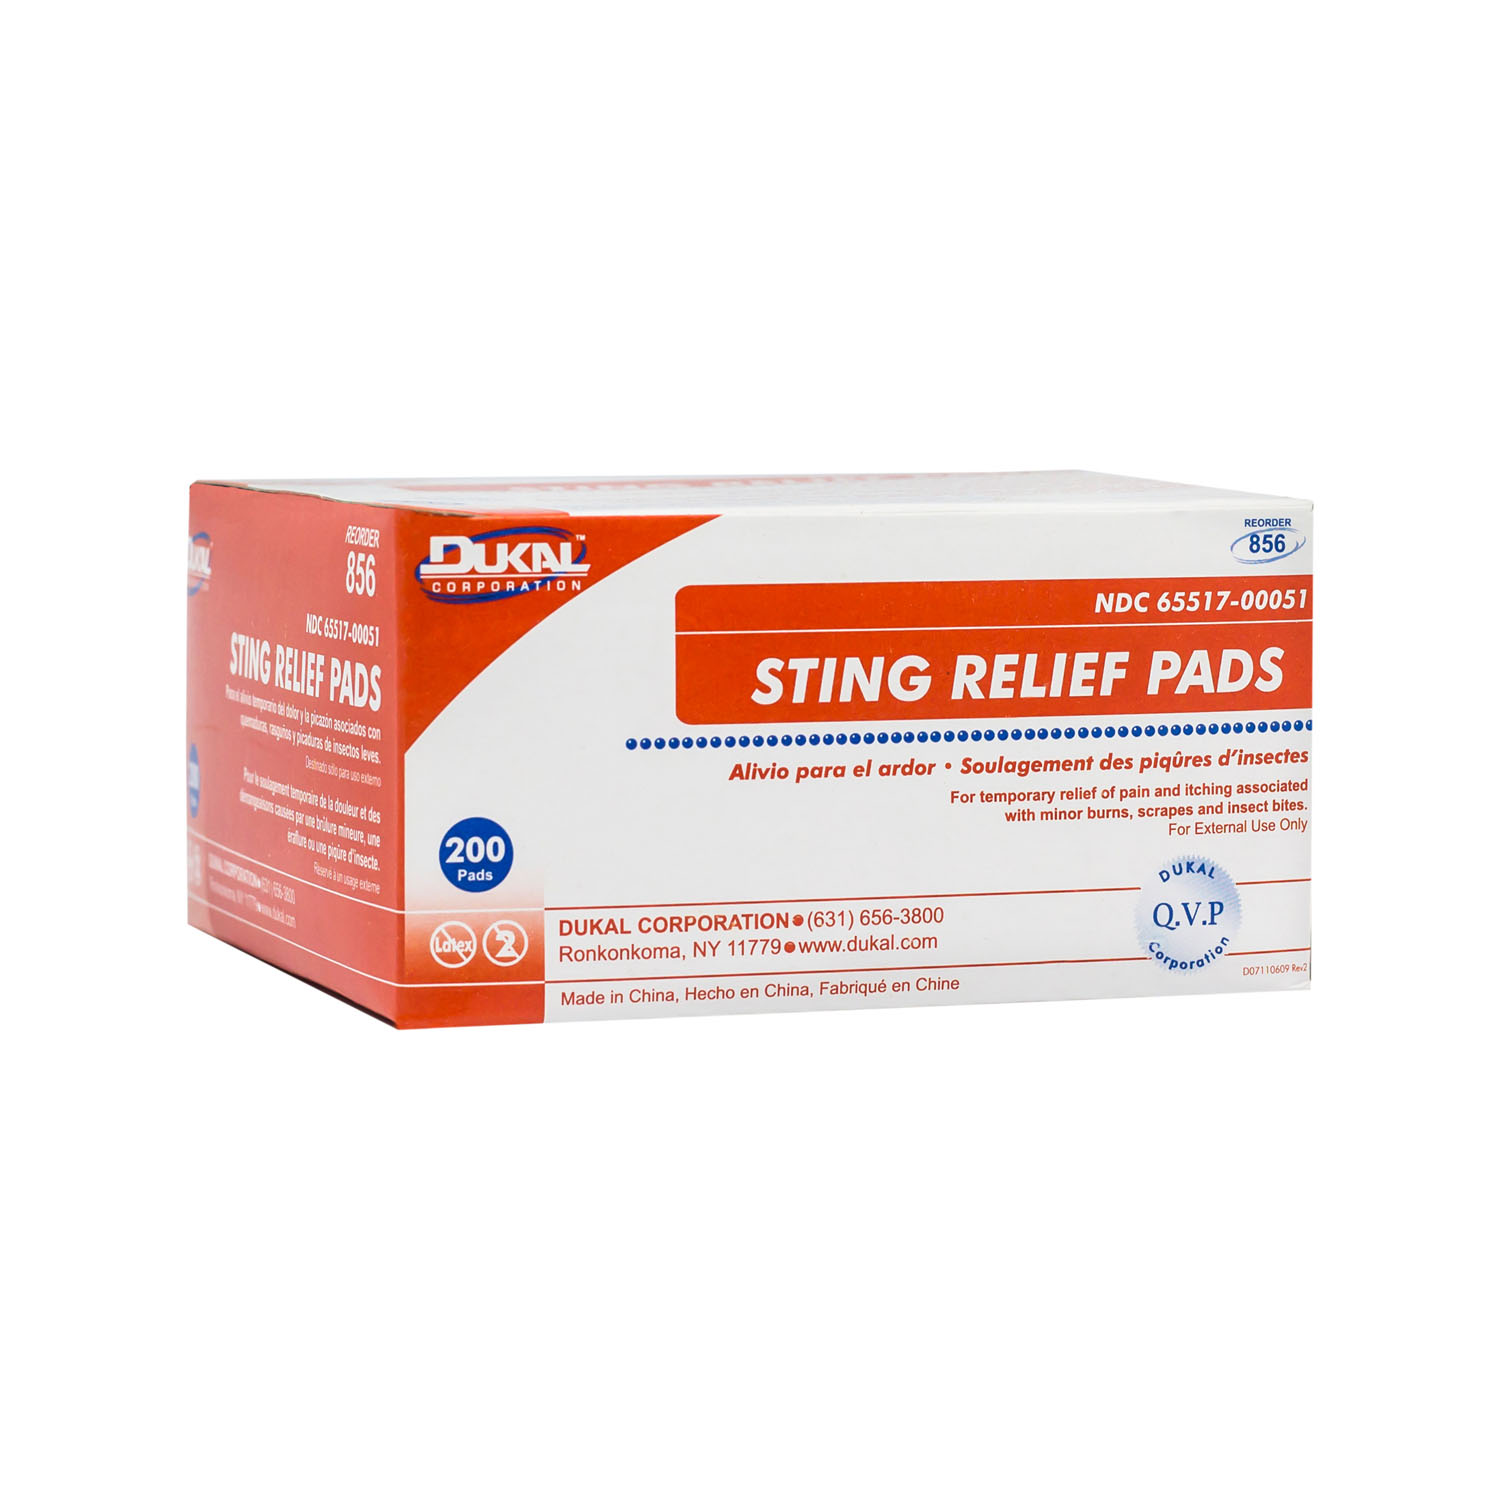 DUKAL STING RELIEF PAD : 856 CS